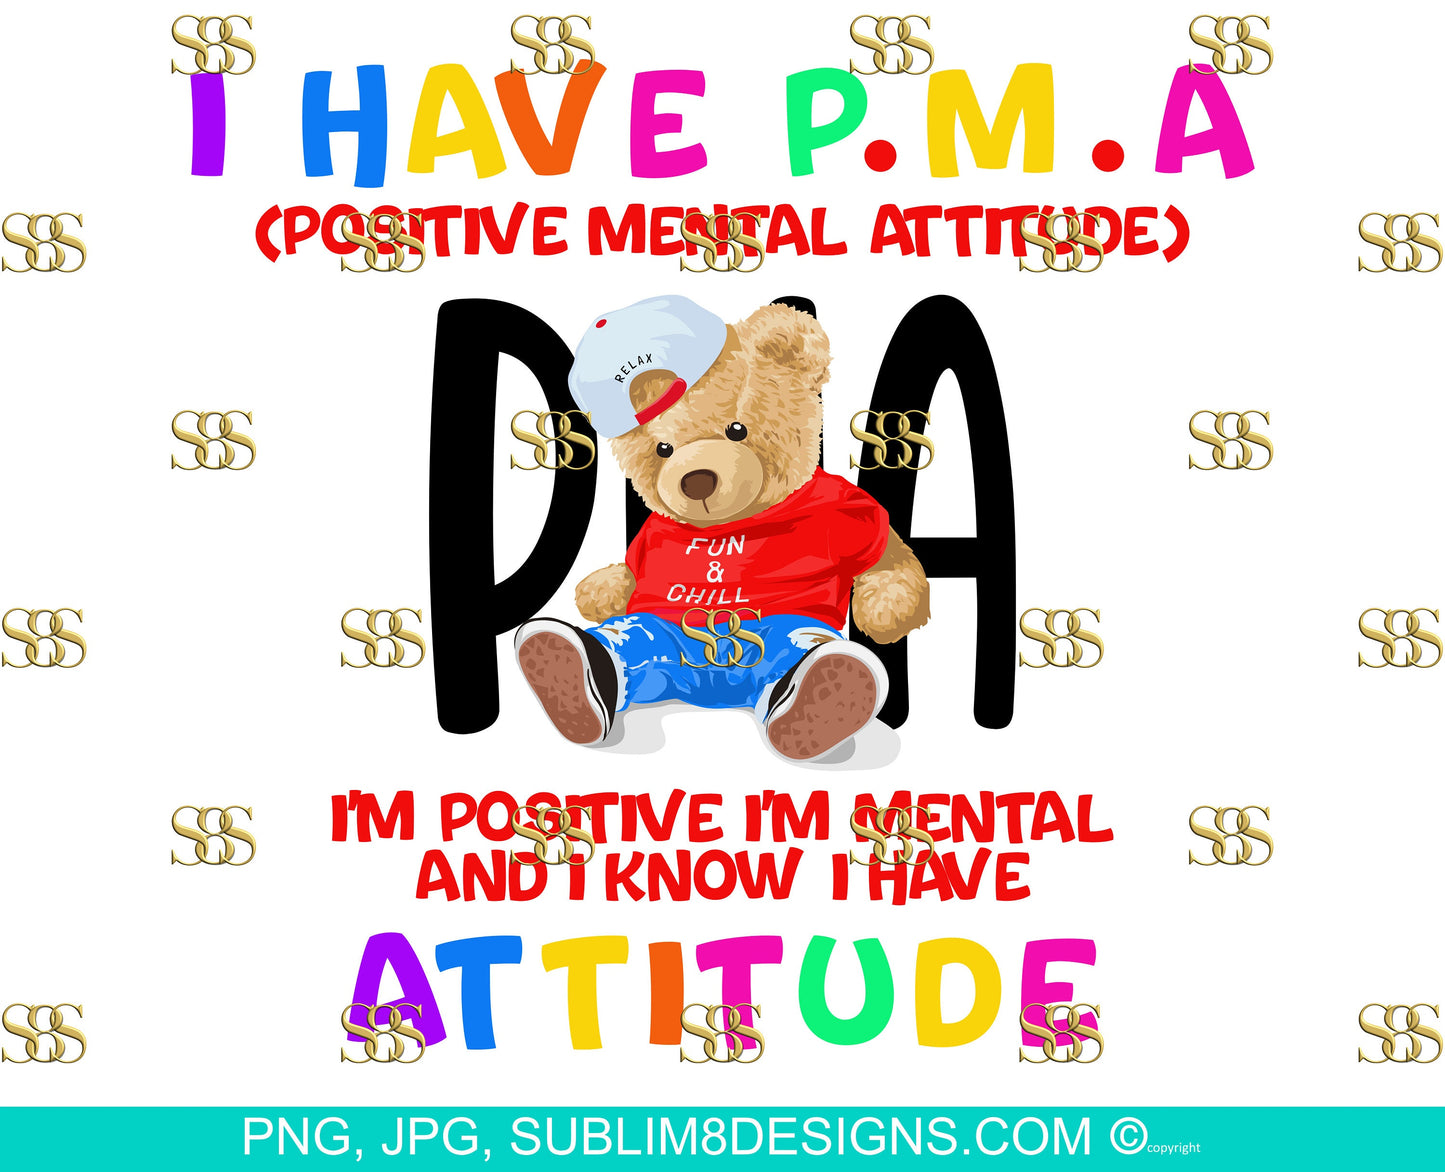 I Have P.M.A Postitive Mental AttitudeI'm Positive I'm Mental And I KNow I Have Attitude PNG and JPG ONLY